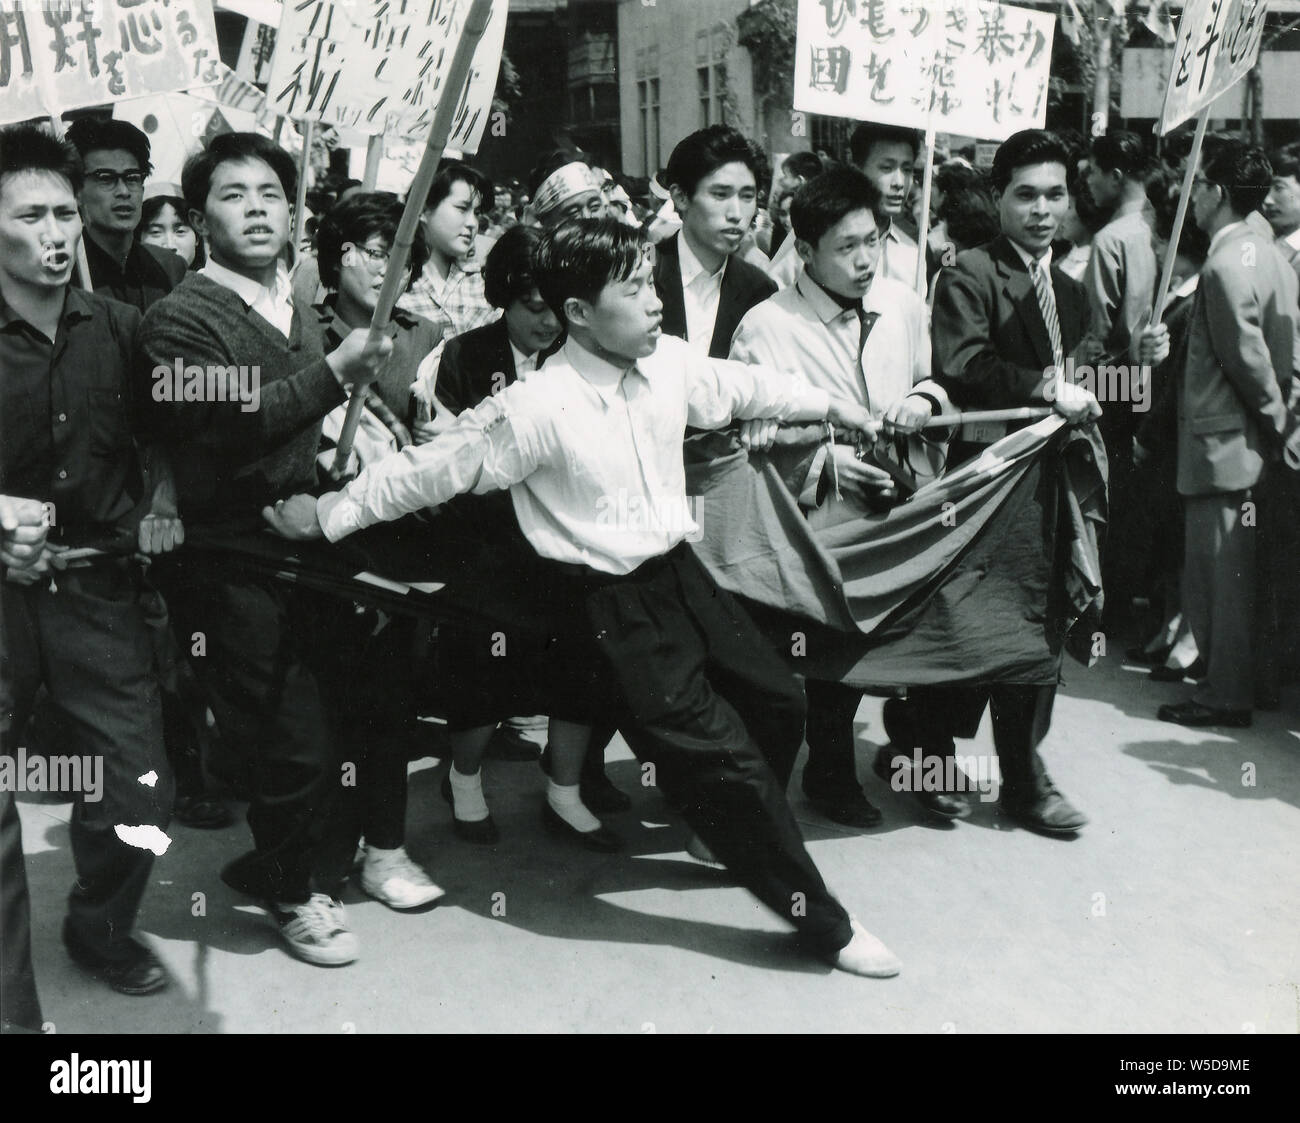 [ 1960s Japan - US-Japan Security Treaty Protest ] —   Japanese students demonstrating against the Treaty of Mutual Cooperation and Security between the United States and Japan (安保条約), Tokyo, 1960 (Showa 35). Stock Photo